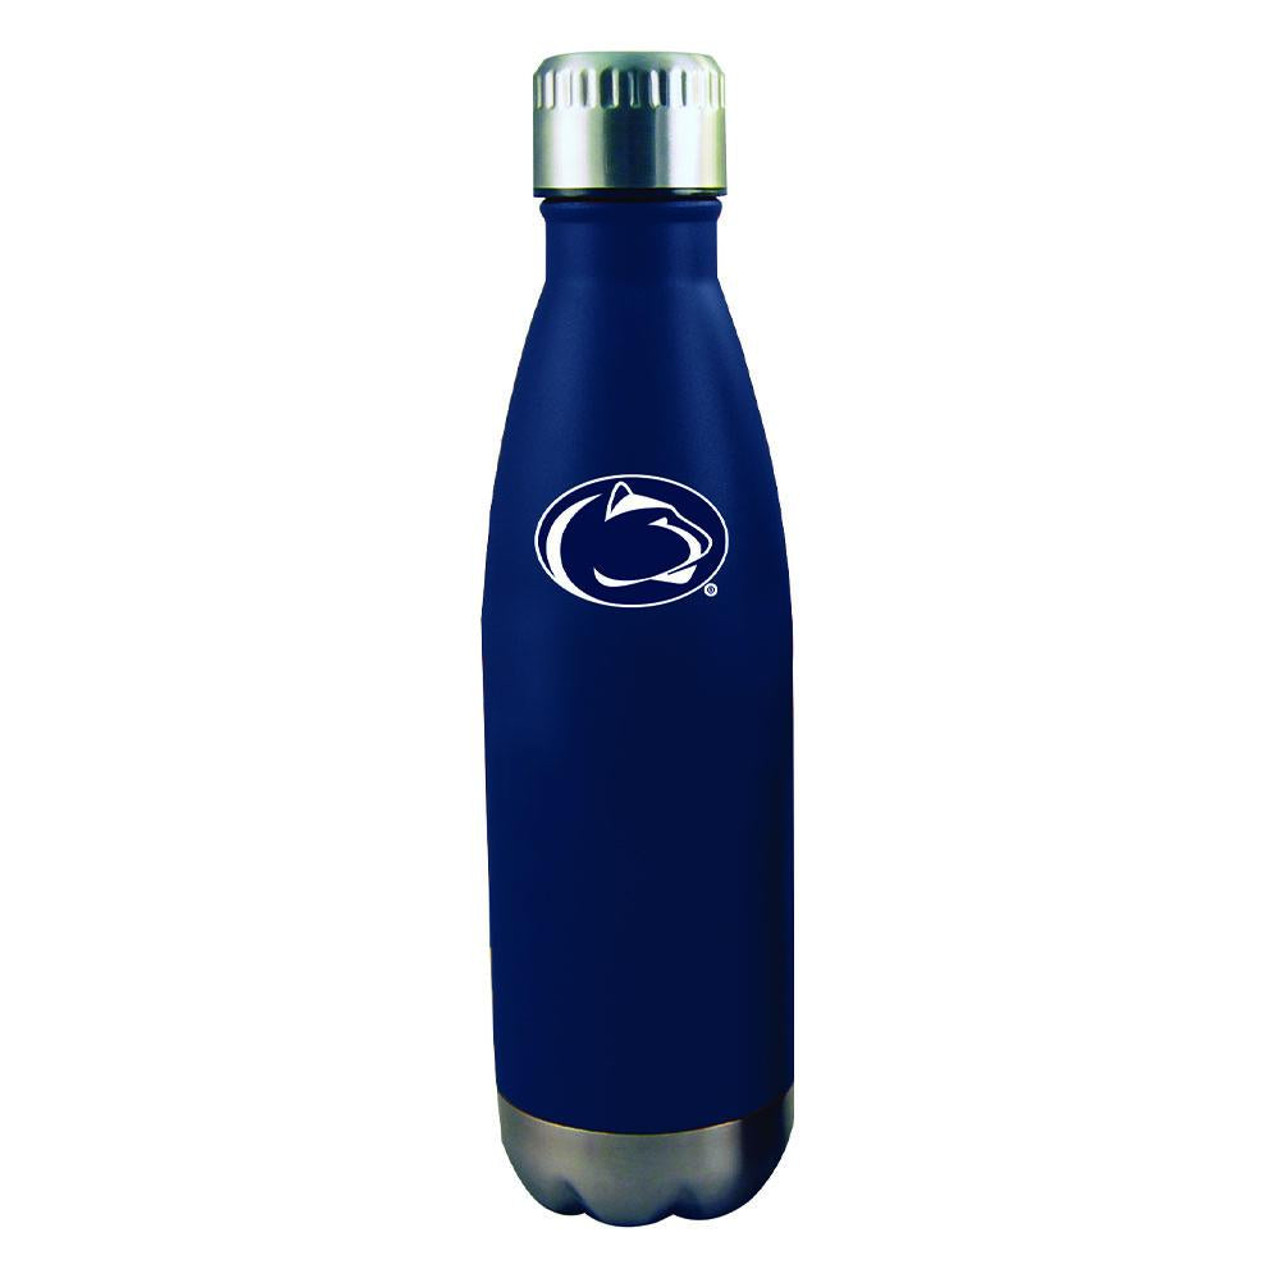 https://cdn11.bigcommerce.com/s-qq5h9nclzt/images/stencil/1280x1280/products/240015/197476/penn-state-nittany-lions-17-oz-stainless-steel-team-bottle_mainProductImage_Full__64540.1691177479.jpg?c=1